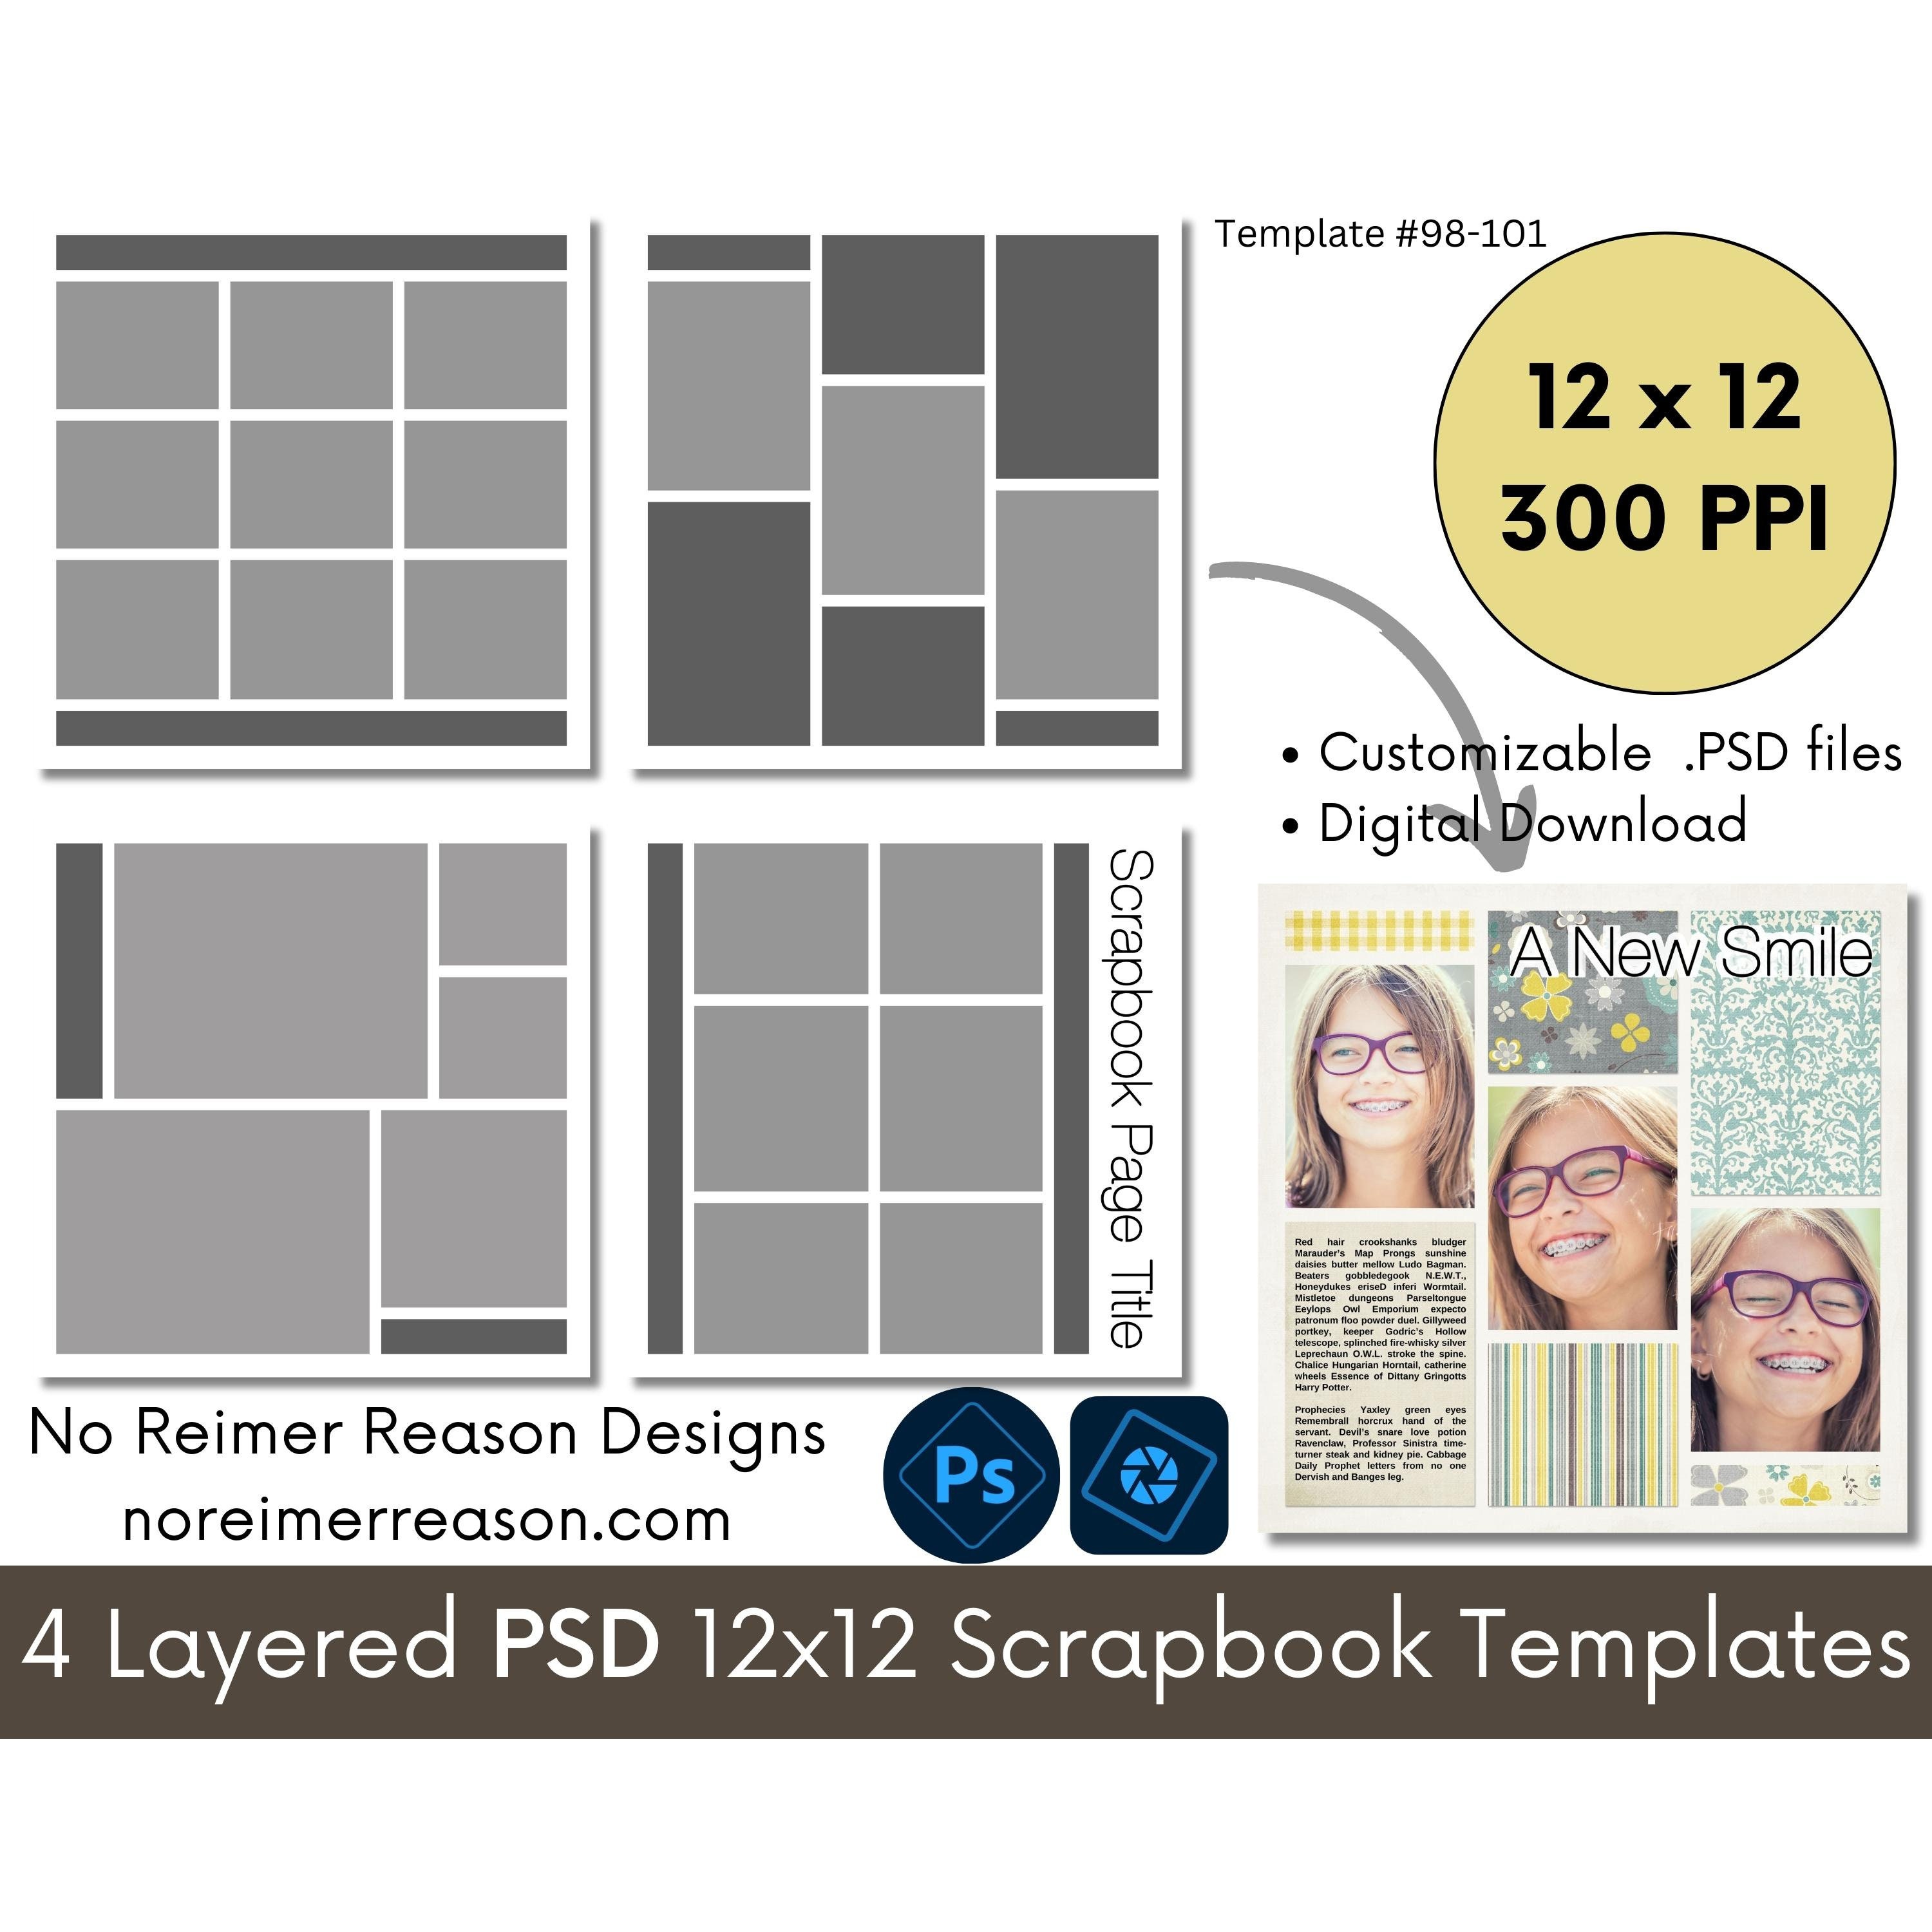 How to Create a 12x12 Scrapbook Layout with Adobe Express